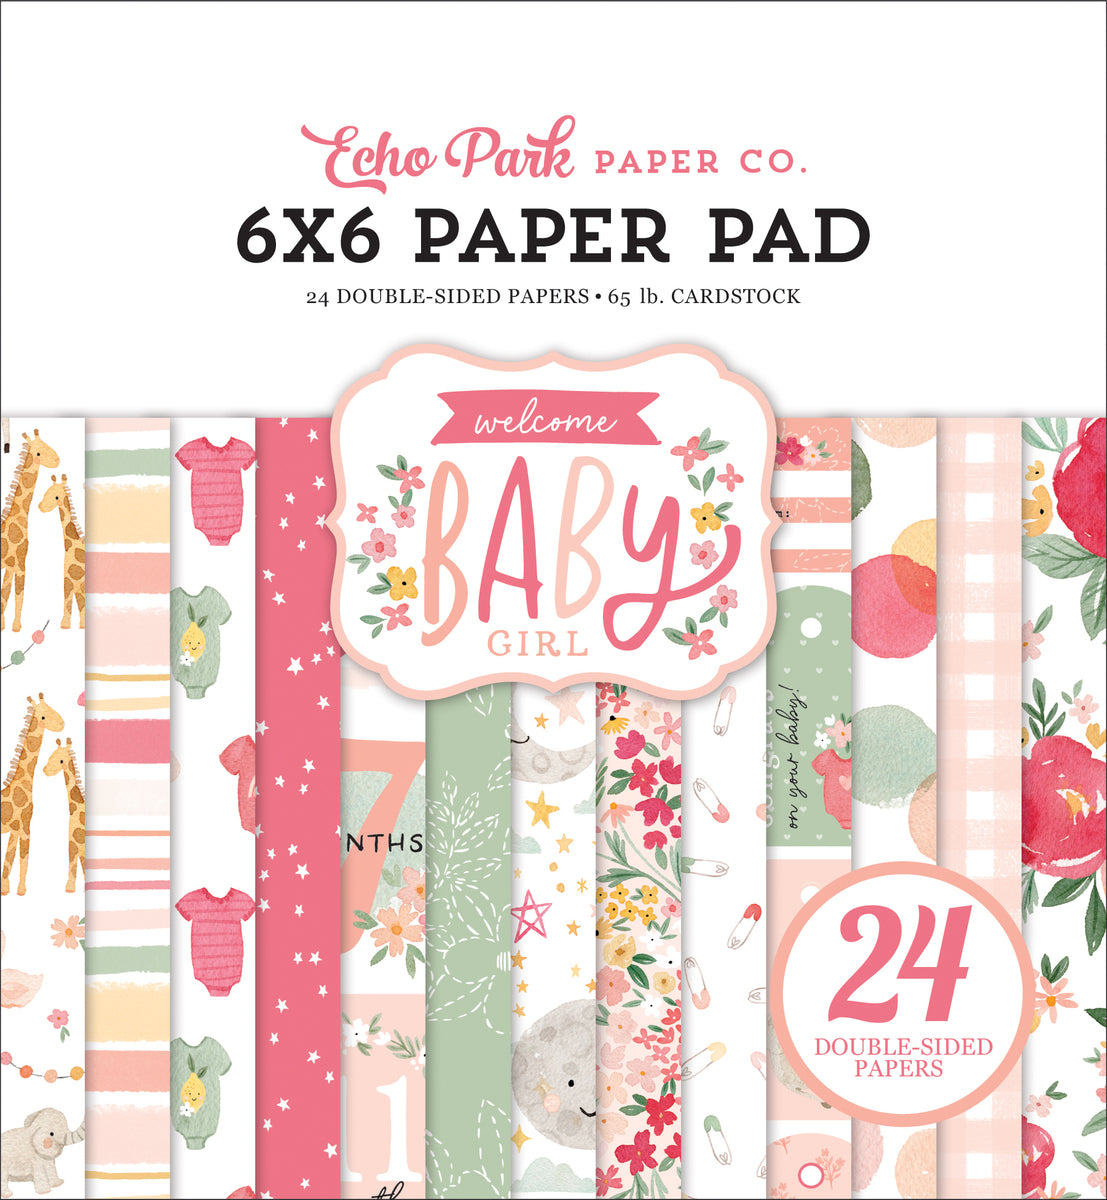 Welcome Baby Girl 6x6 patterned paper pad from Echo Park Paper